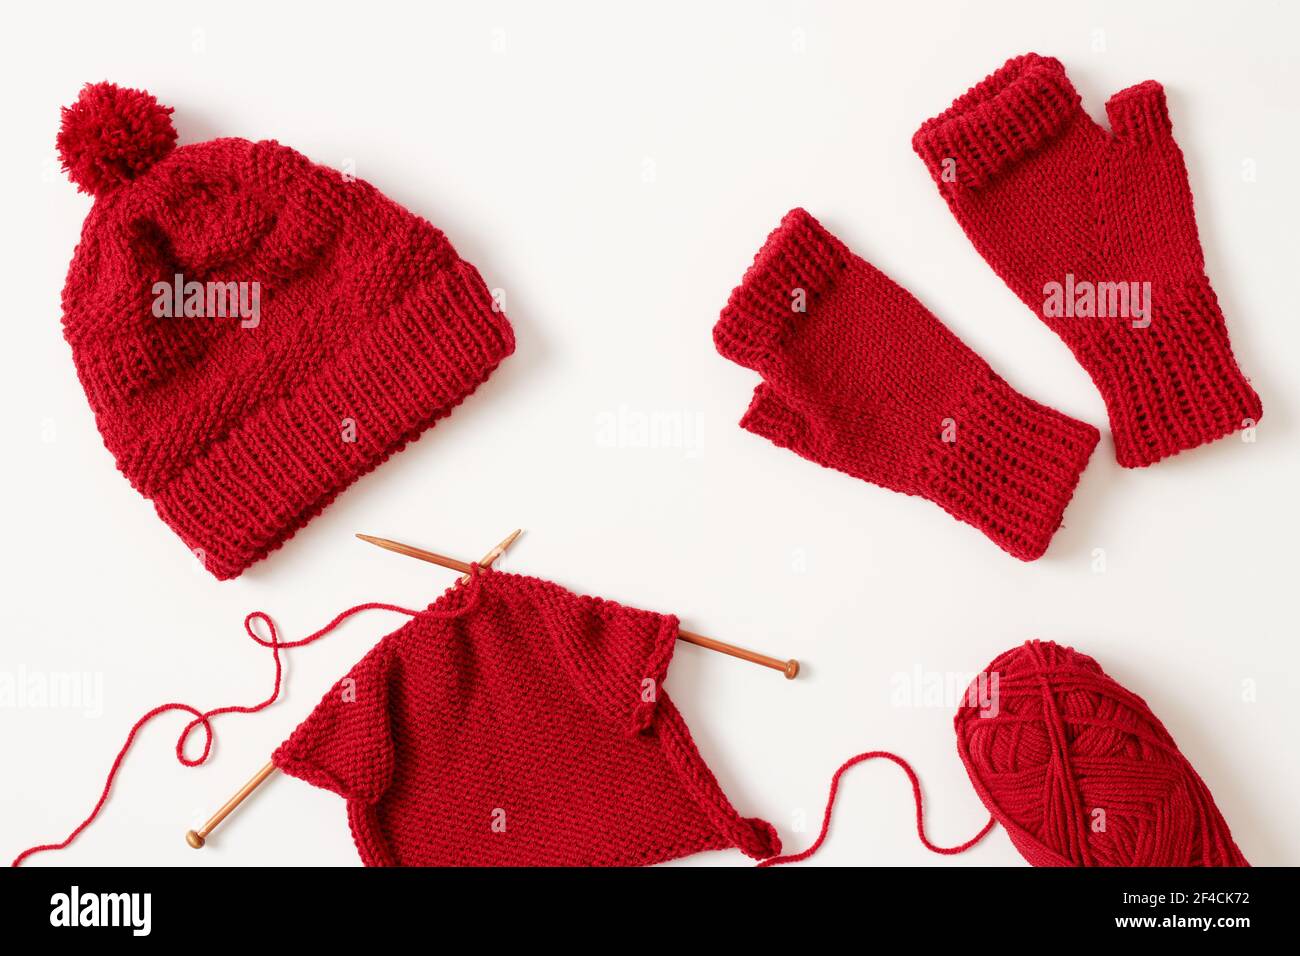 Knitting project in progress. Winter hat and mittens knitted with red yarn on white background. Stock Photo